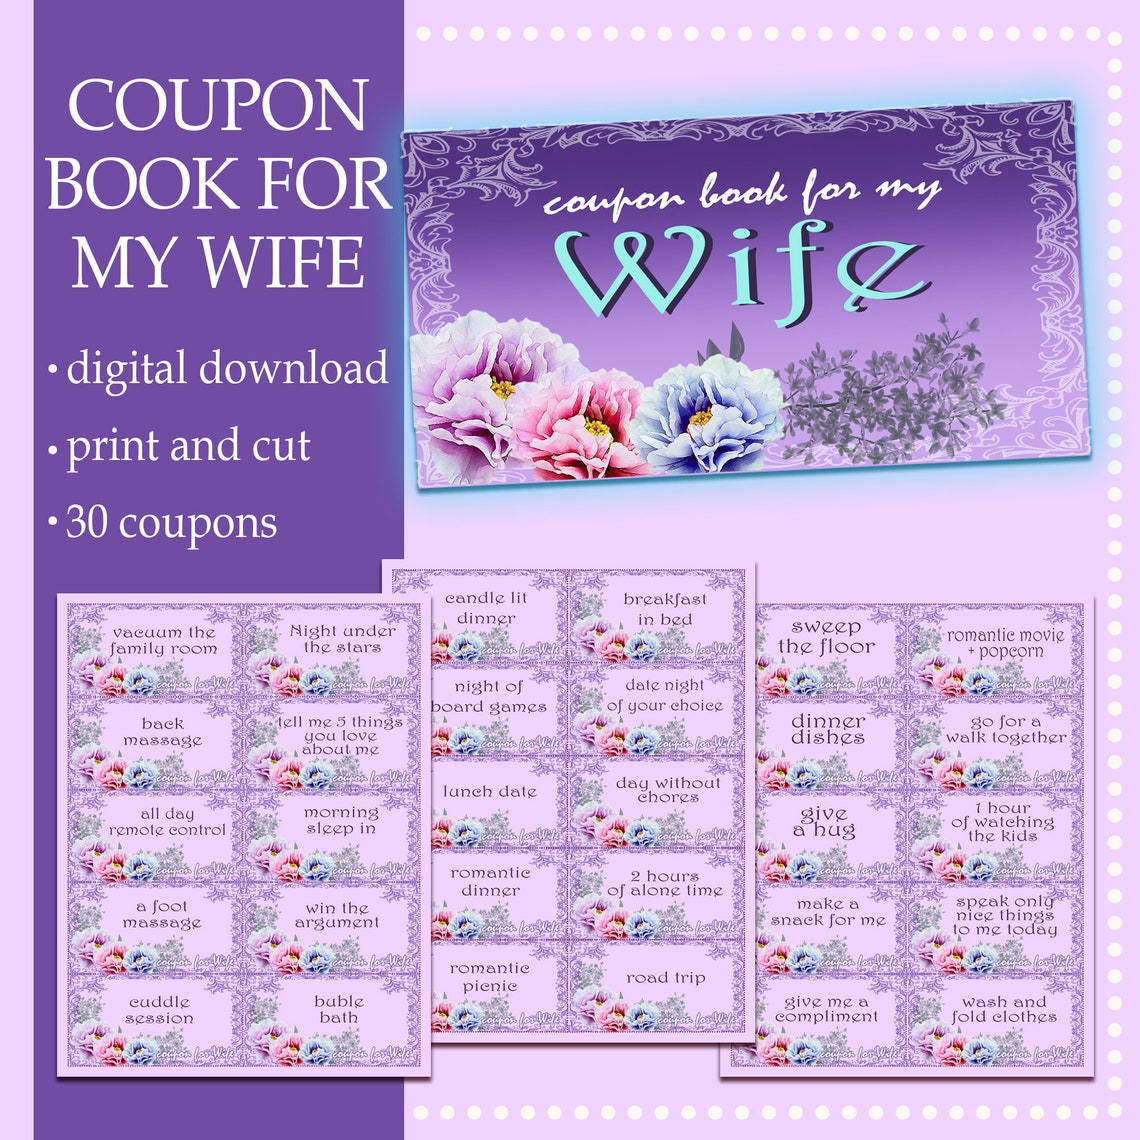 coupon-book-for-wife-printable-coupon-book-instant-download-love